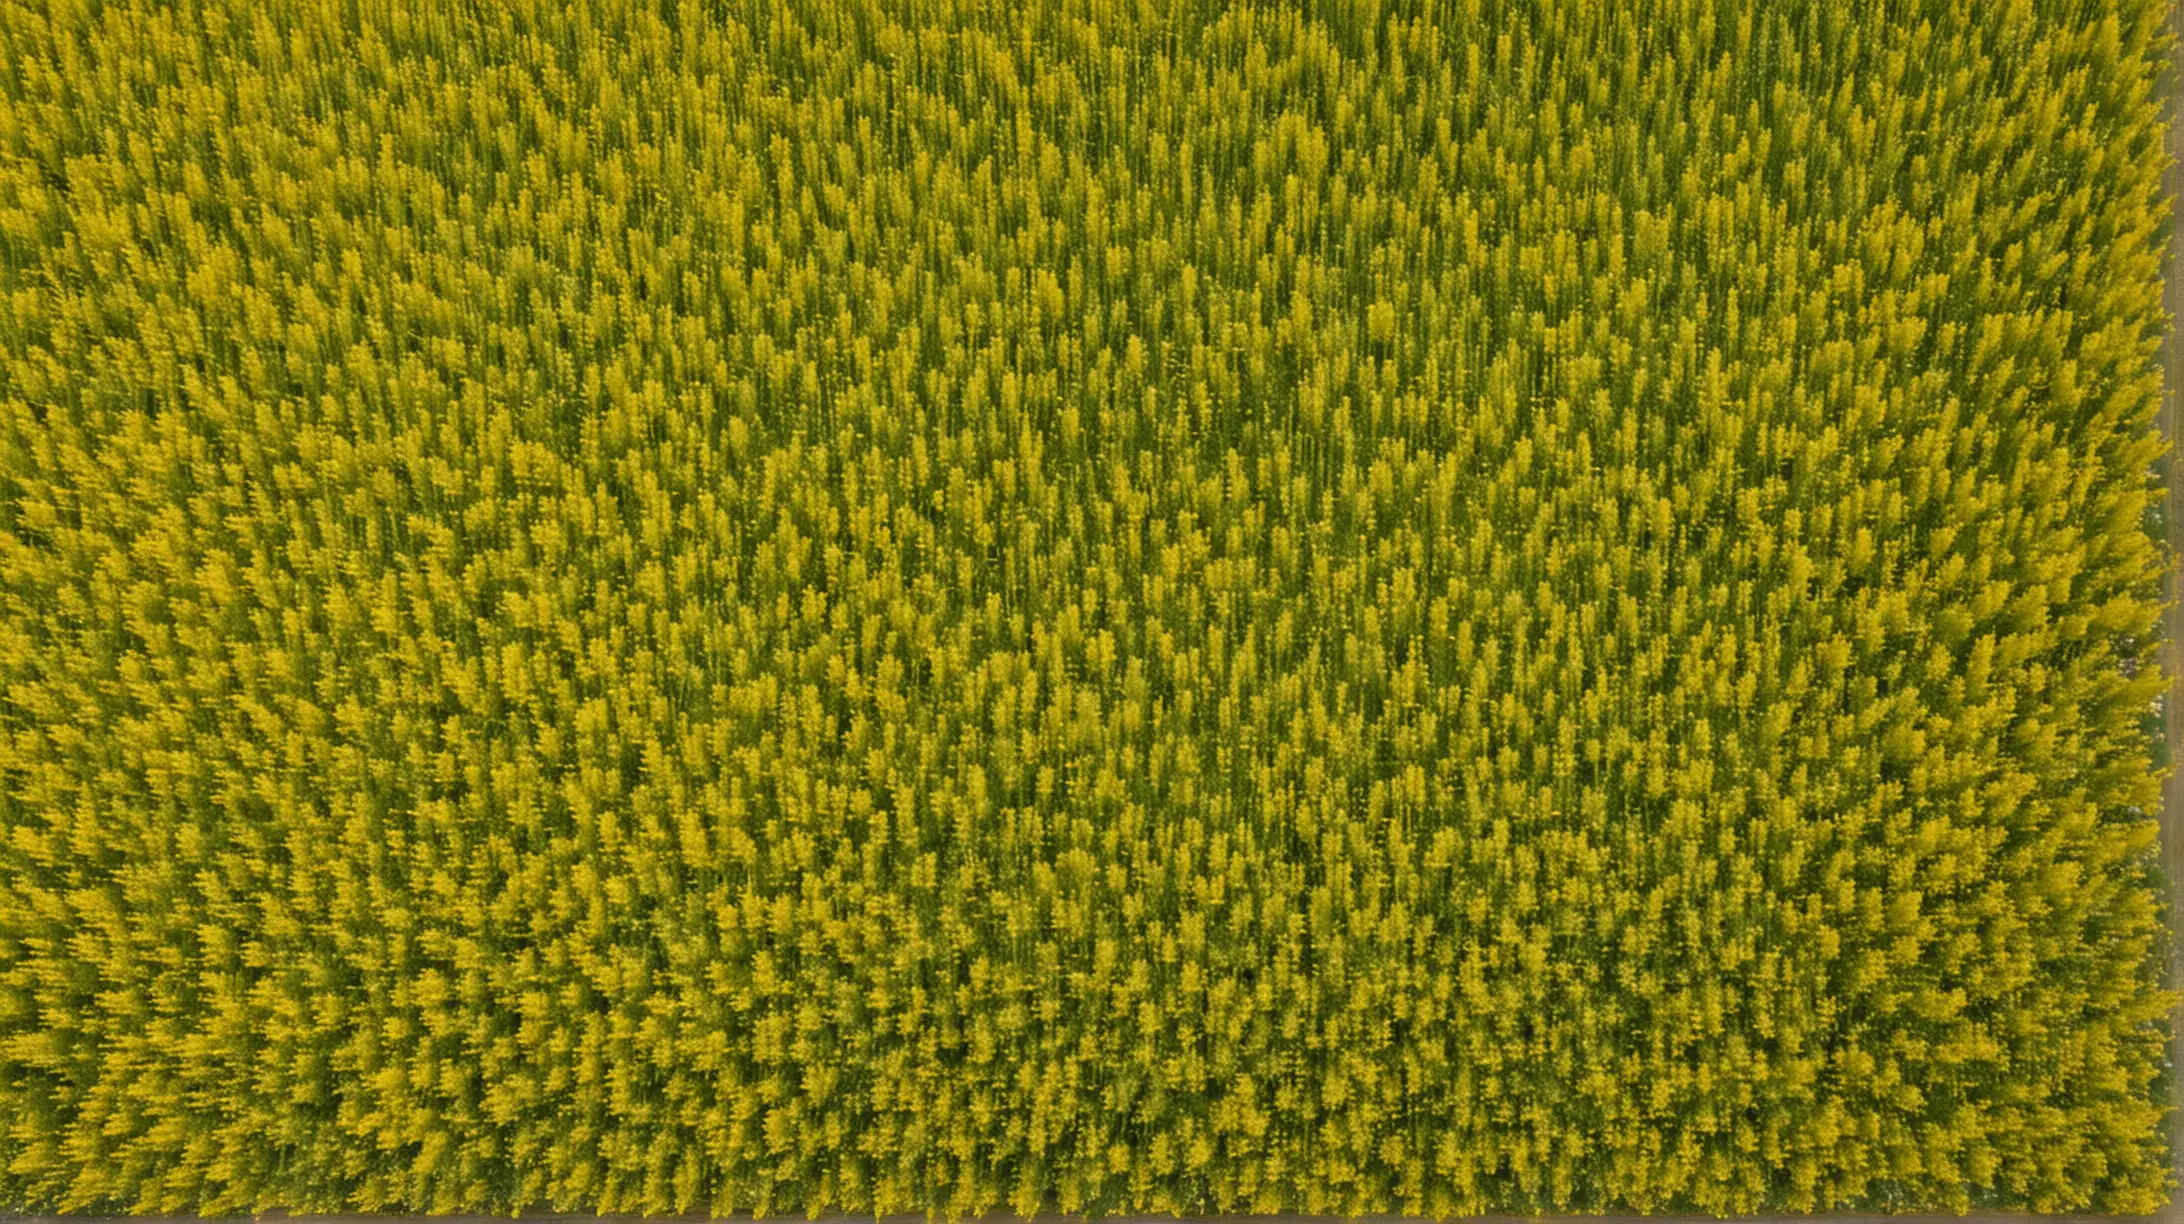 gigantic mountainous fields of yellowish hyssop herbs. grassy plains. very intricately and microscopically detailed. landscape. zoom out. sky view. aerial view. 